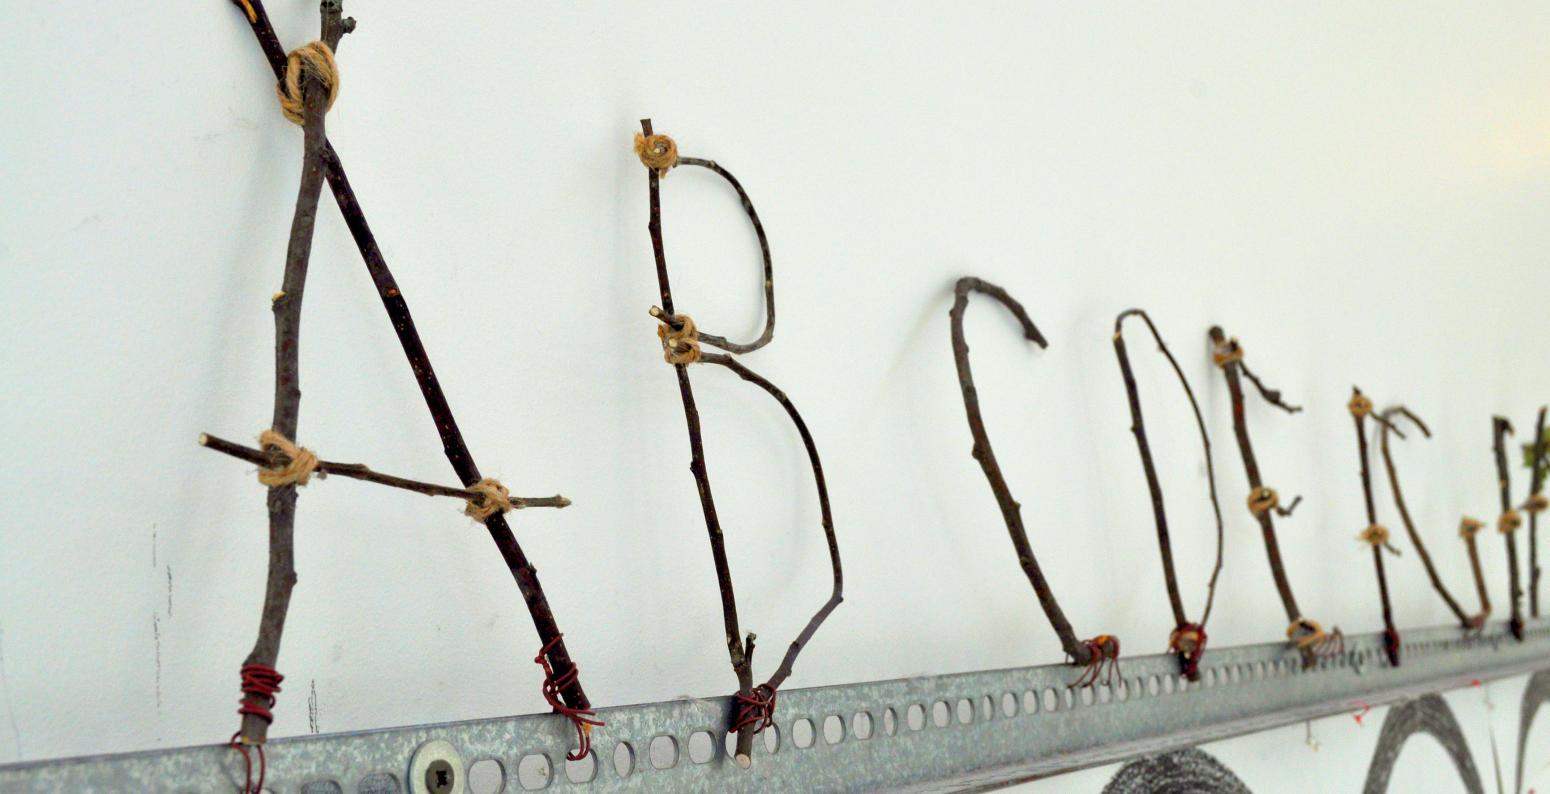 An alphabet made from twigs and twine attached to a long metal rail.